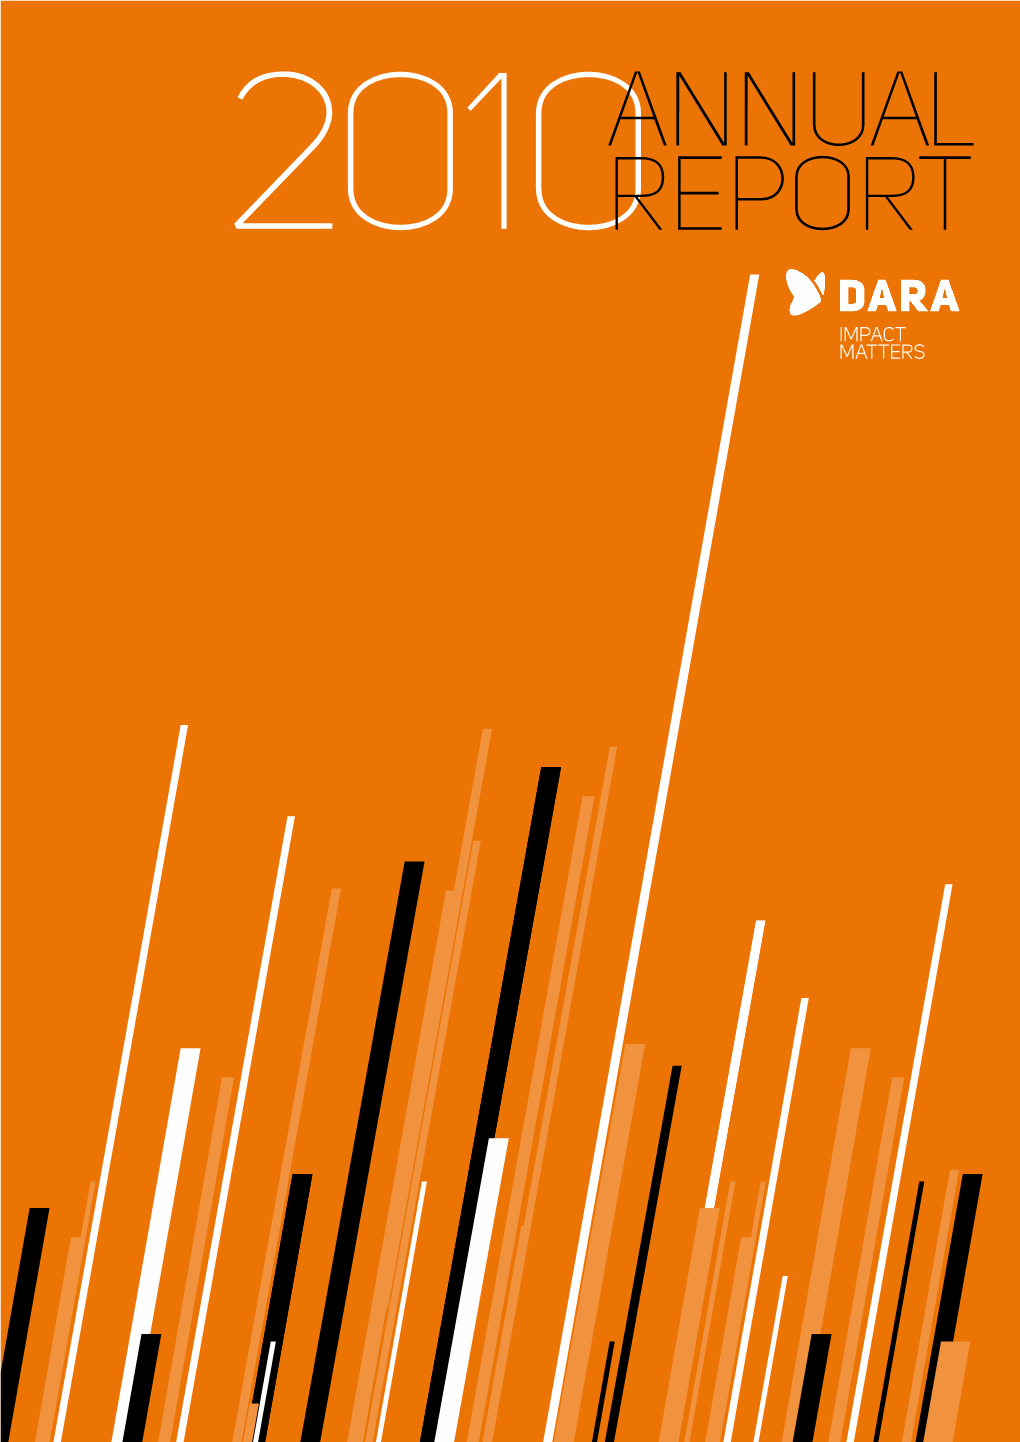 Download the 2010 Annual Report